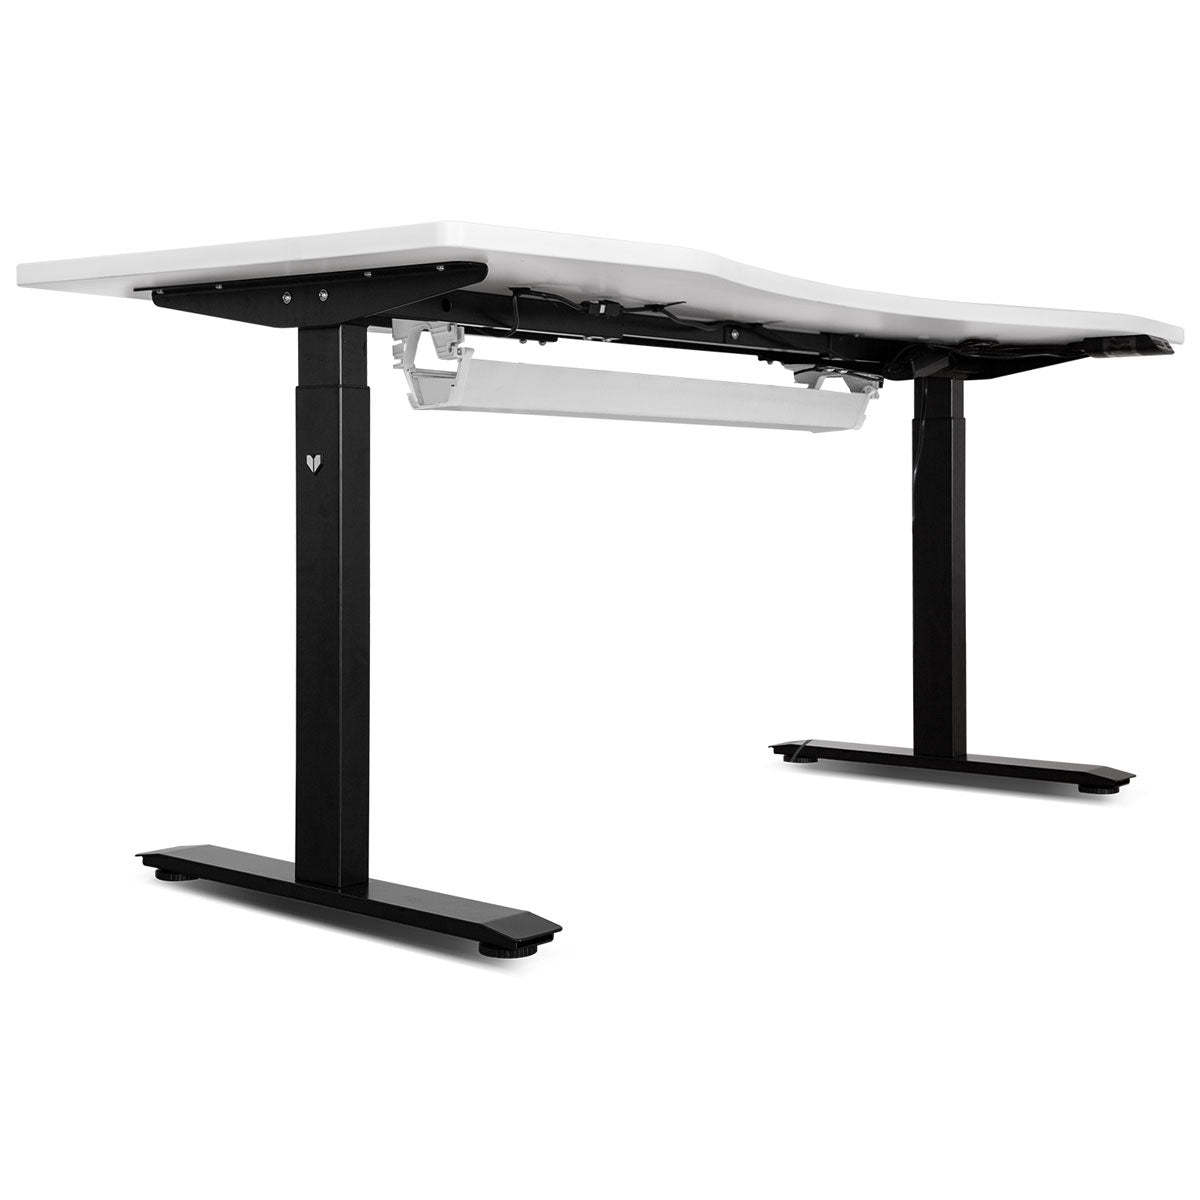 Lifespan Fitness WalkingPad M2 Treadmill with ErgoDesk Automatic White Standing Desk 1800mm + Cable Management Tray